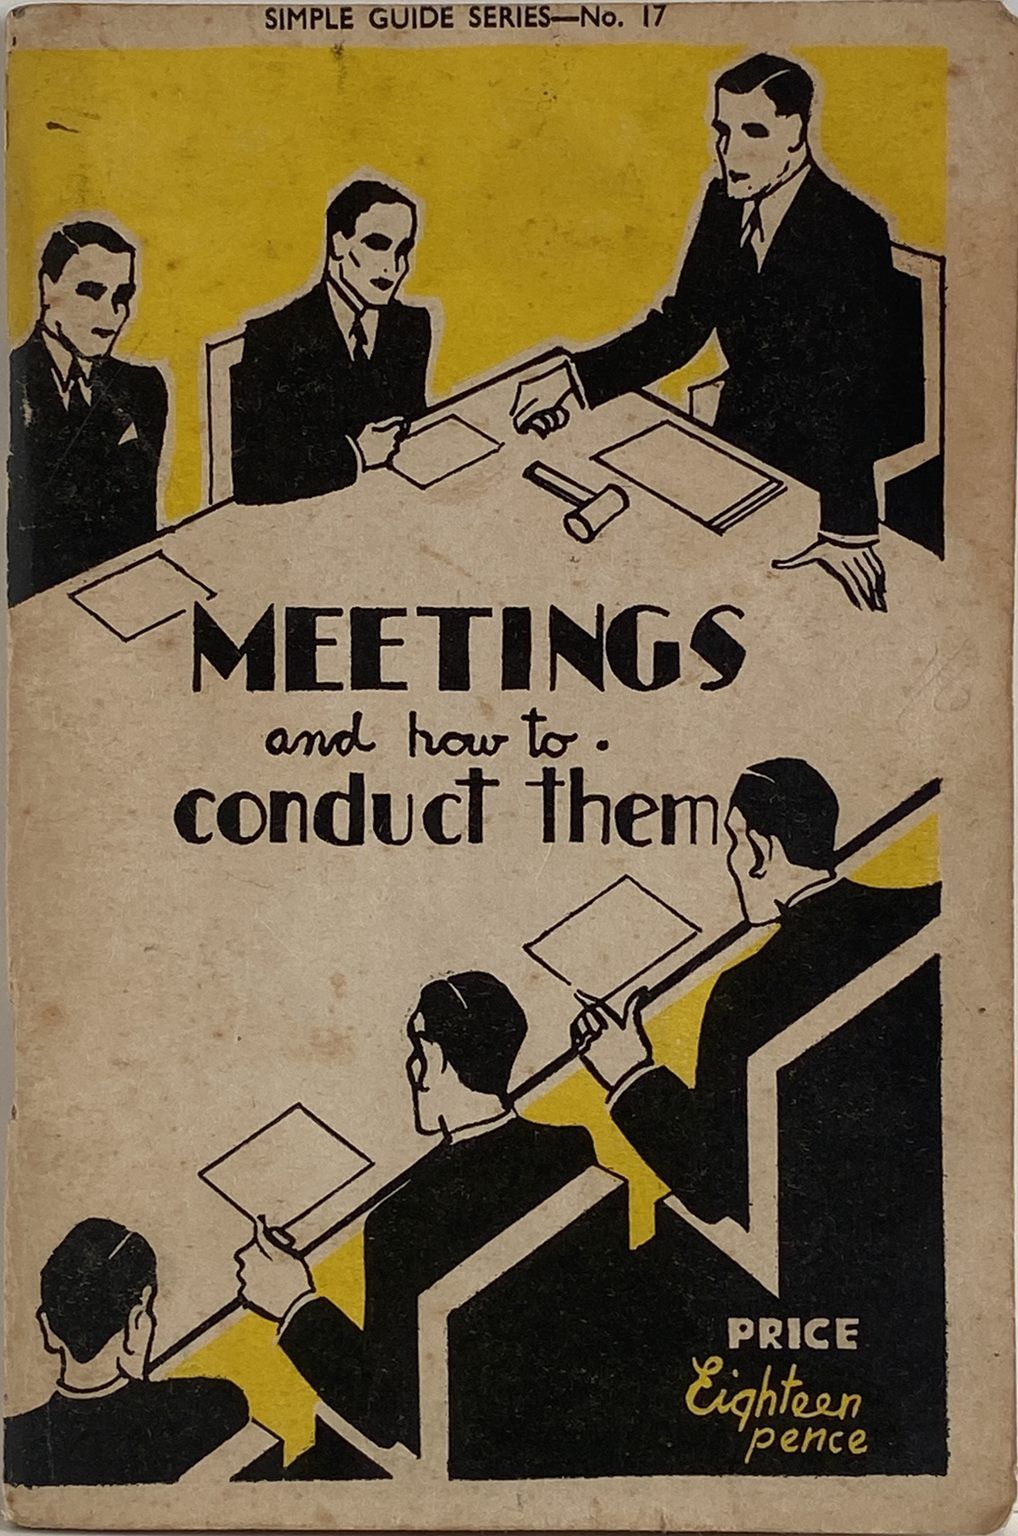 MEETINGS and how to conduct them